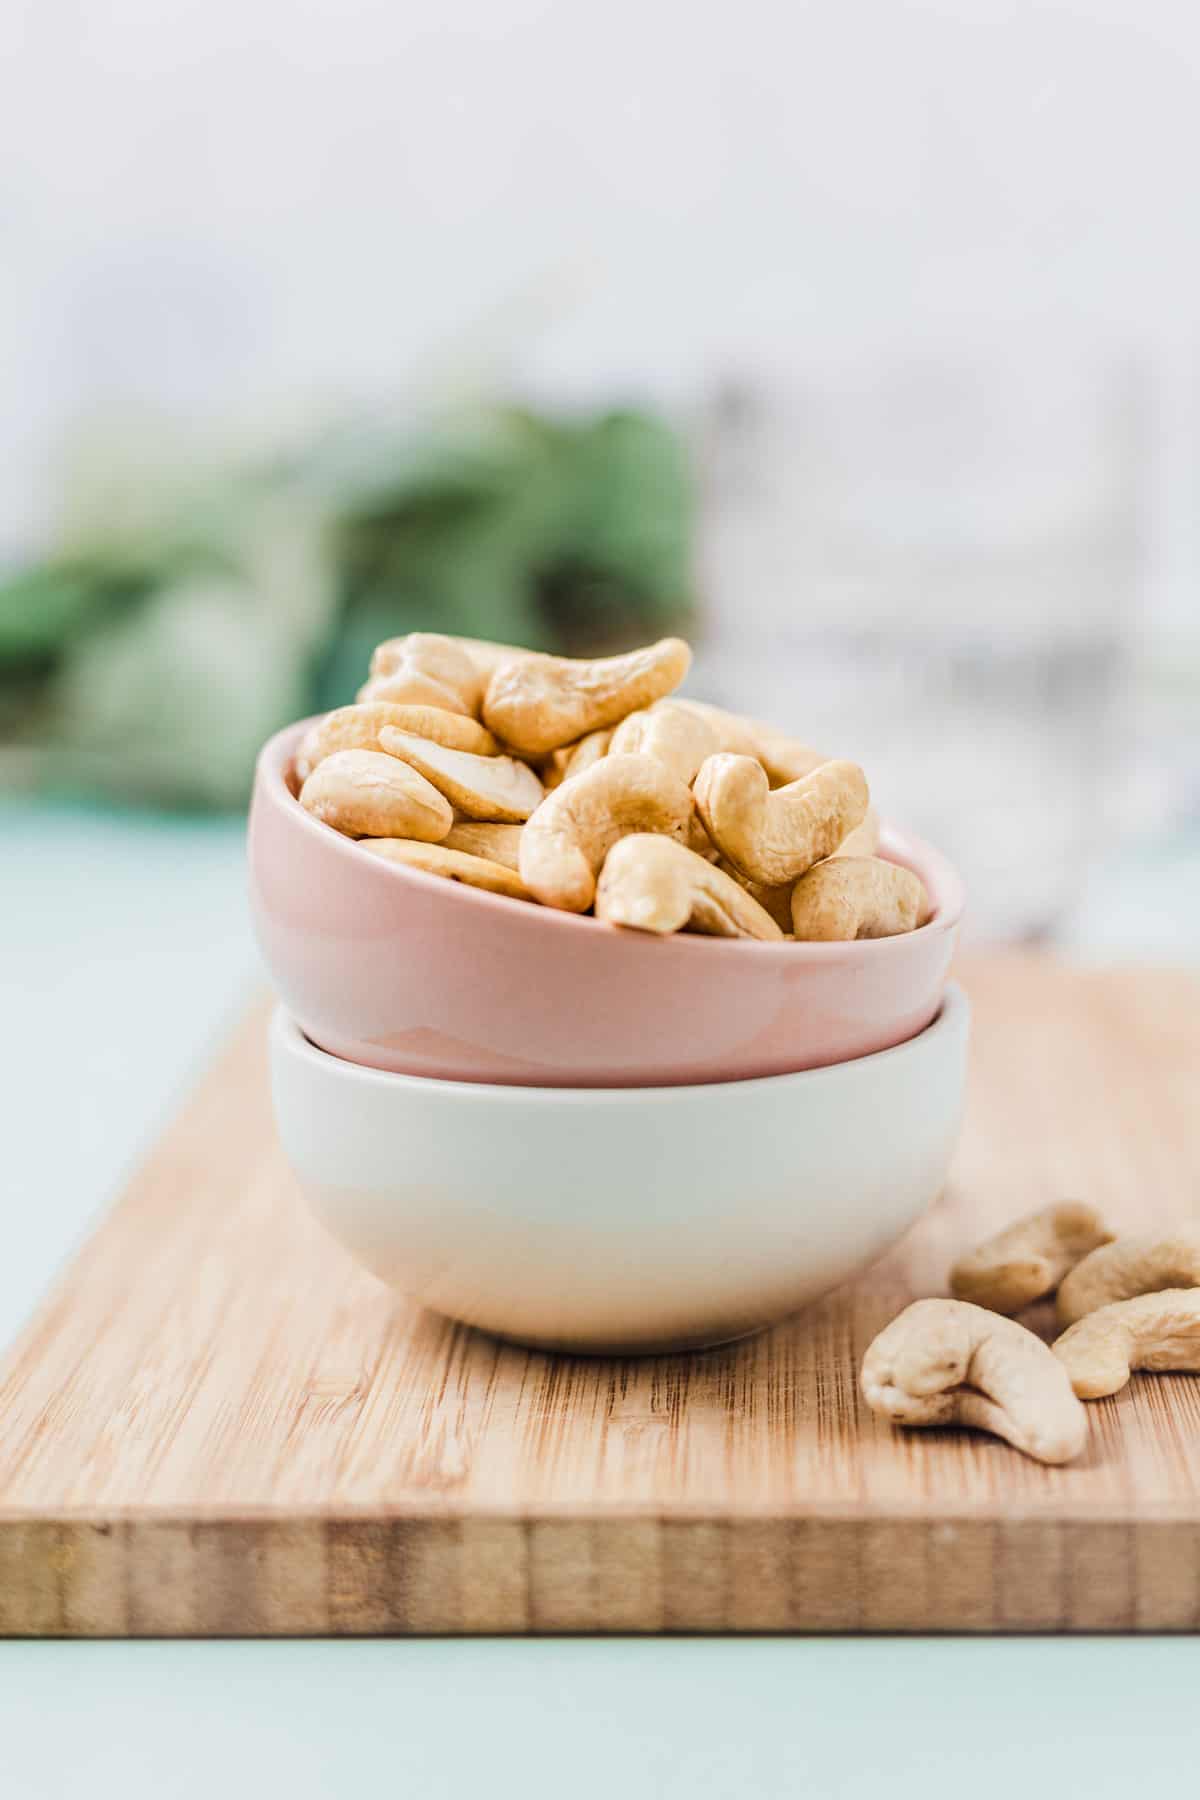 Cashews in a small pink bowl.